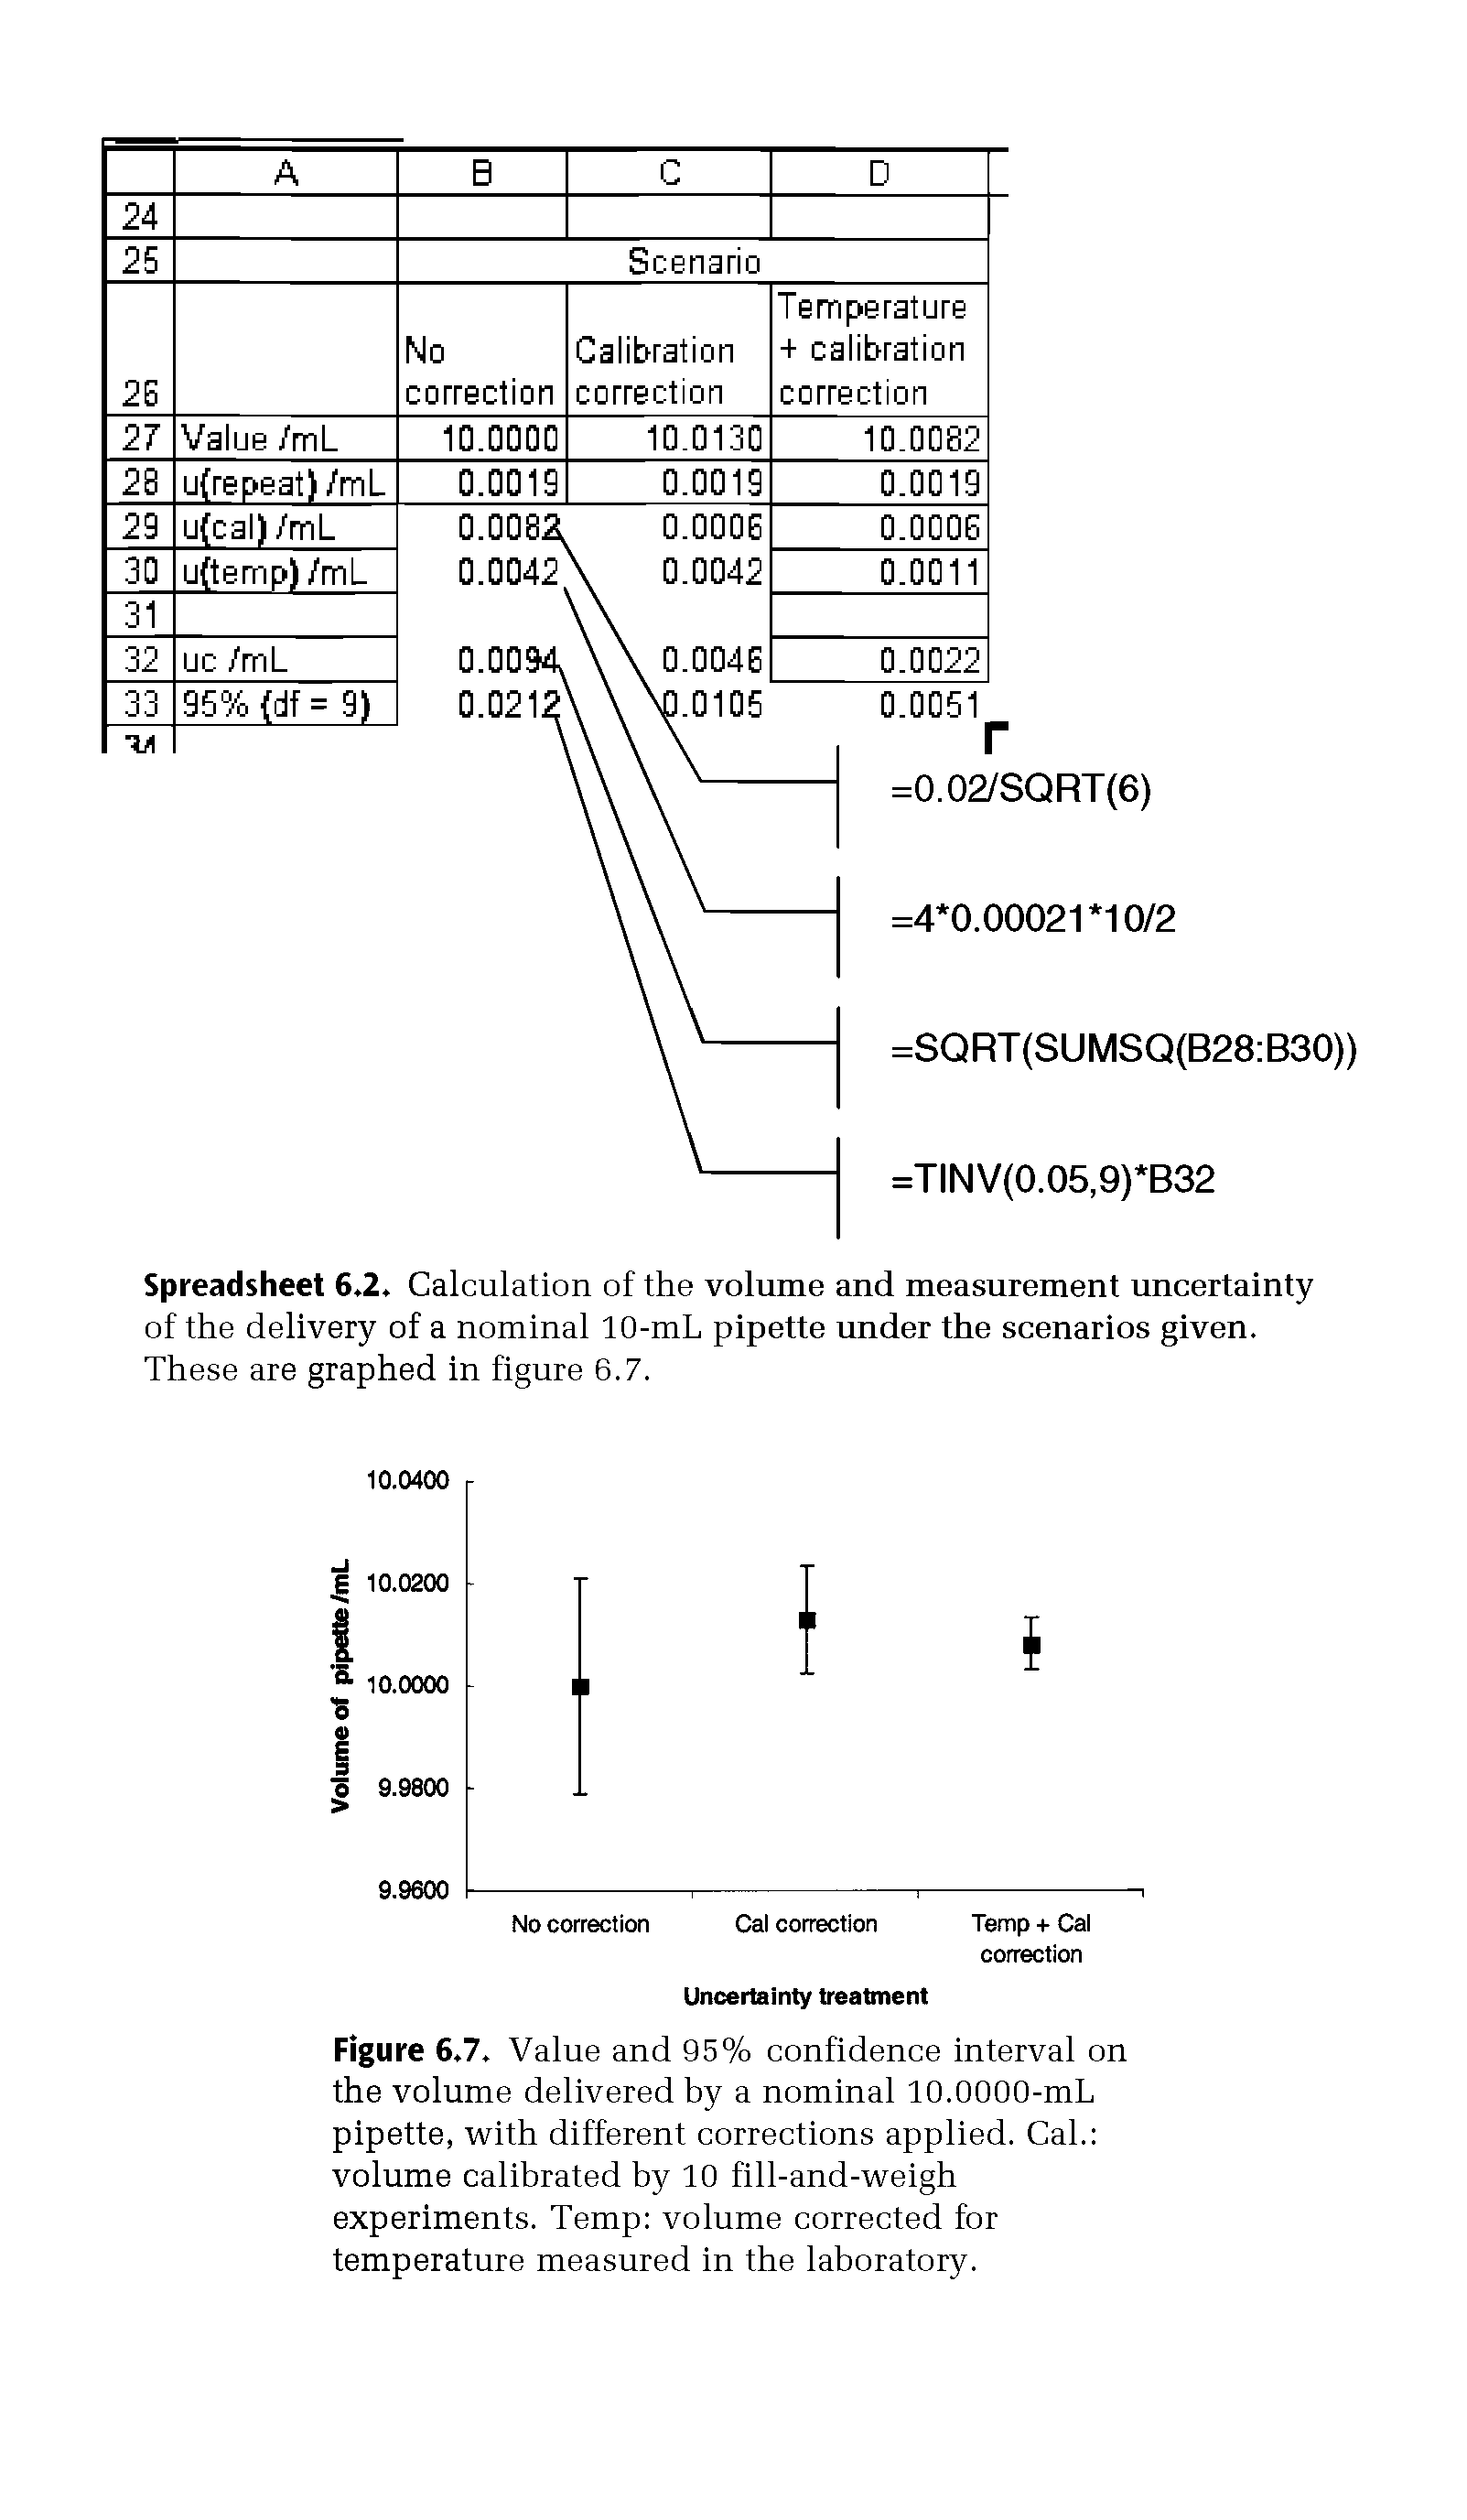 Figure 6 7. Value and 95% confidence interval on the volume delivered by a nominal 10.0000-mL pipette, with different corrections applied. Cal. volume calibrated by 10 fill-and-weigh experiments. Temp volume corrected for temperature measured in the laboratory.